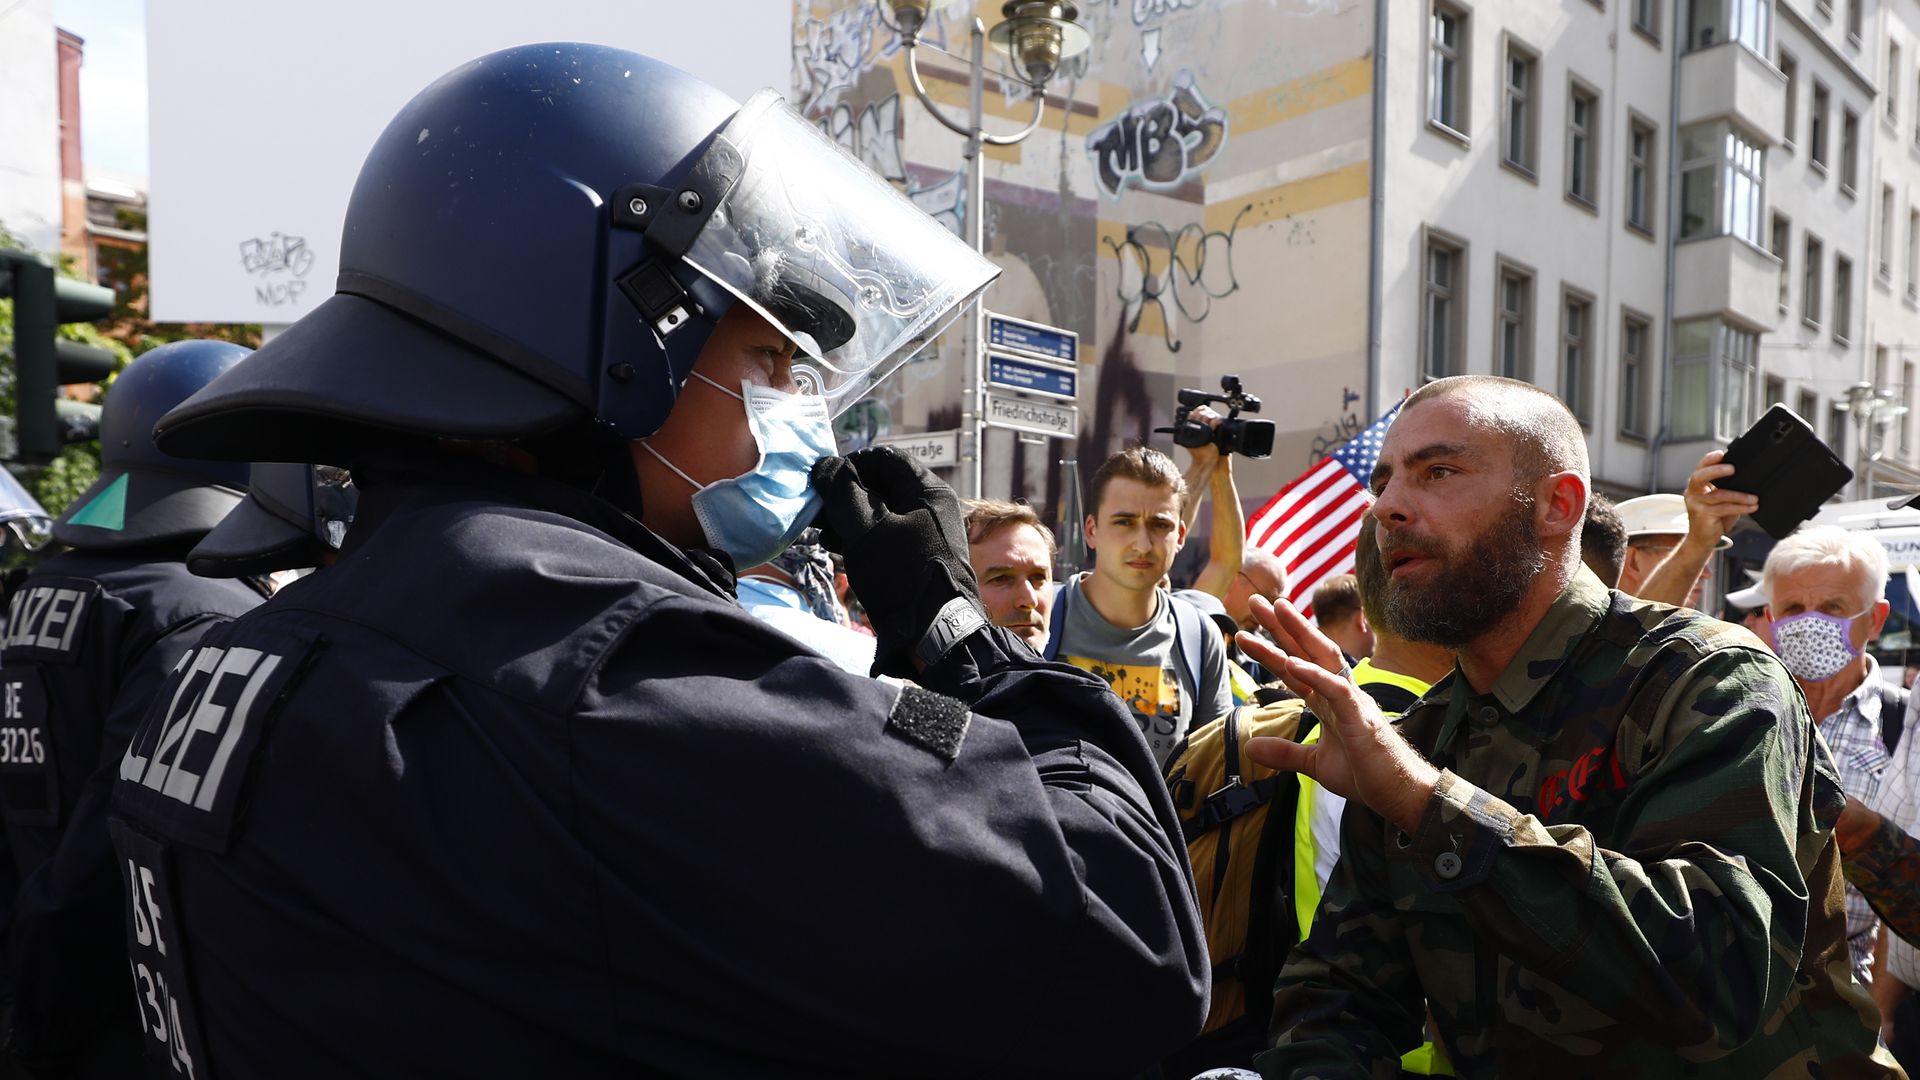 A protester confronting a police officer in Berlin on Aug. 28.